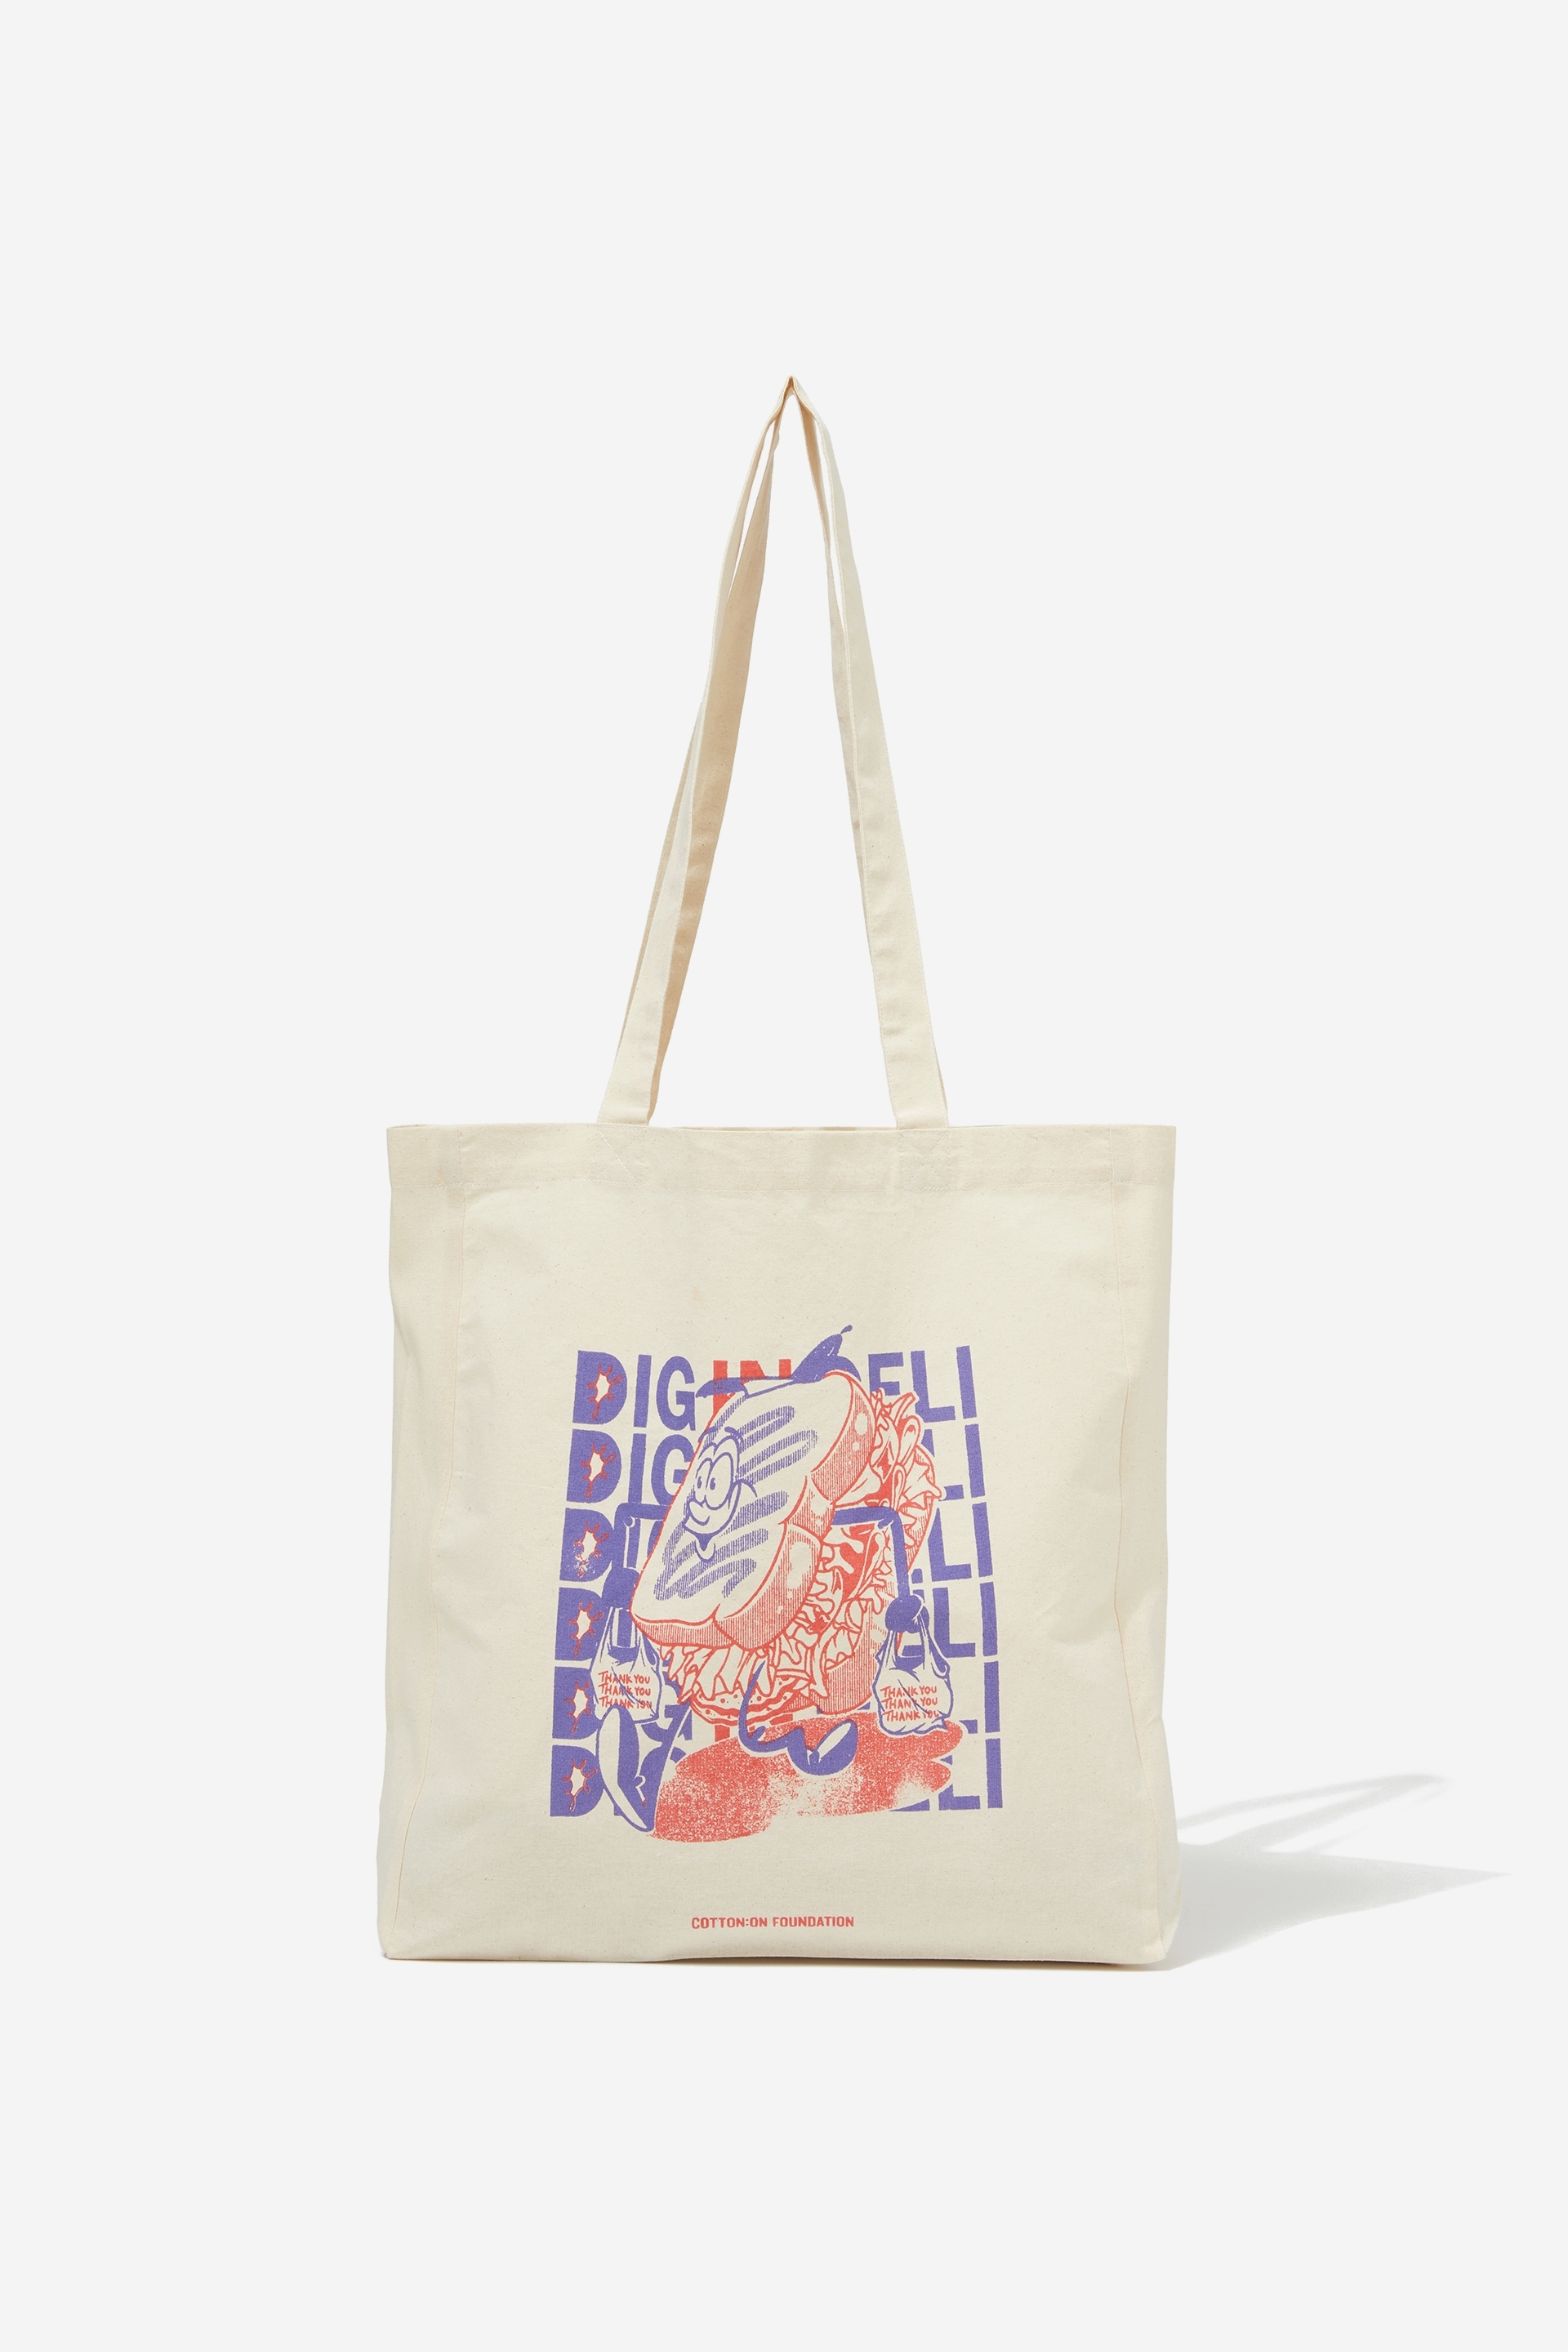 Cotton On Foundation - Foundation Typo Recycled Tote Bag - Dig in deli